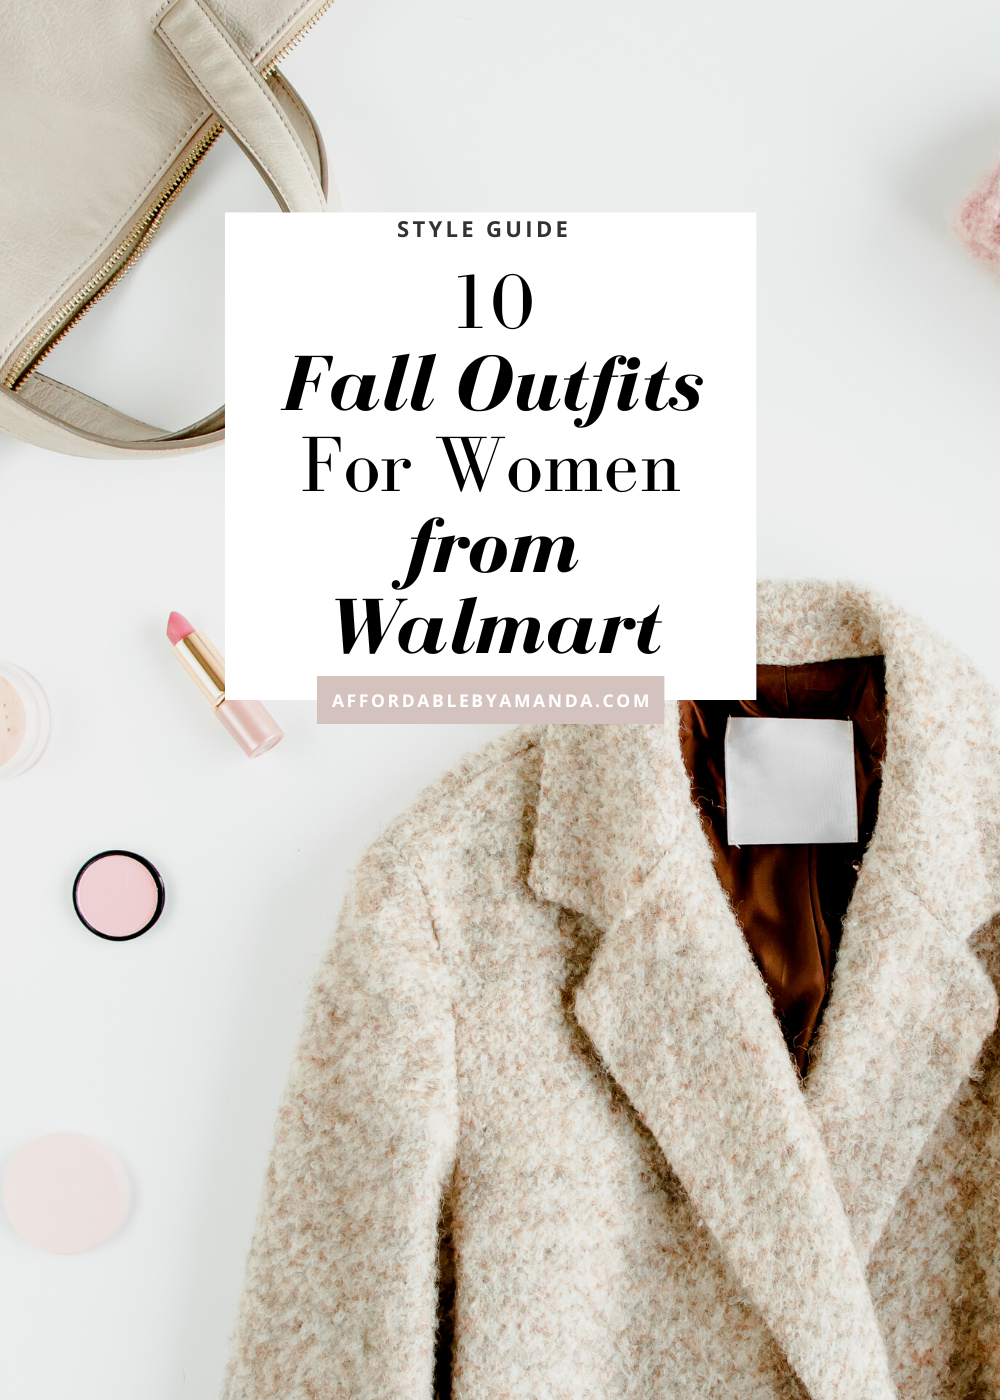 10 Fall Outfits for Women from Walmart - Affordable by Amanda